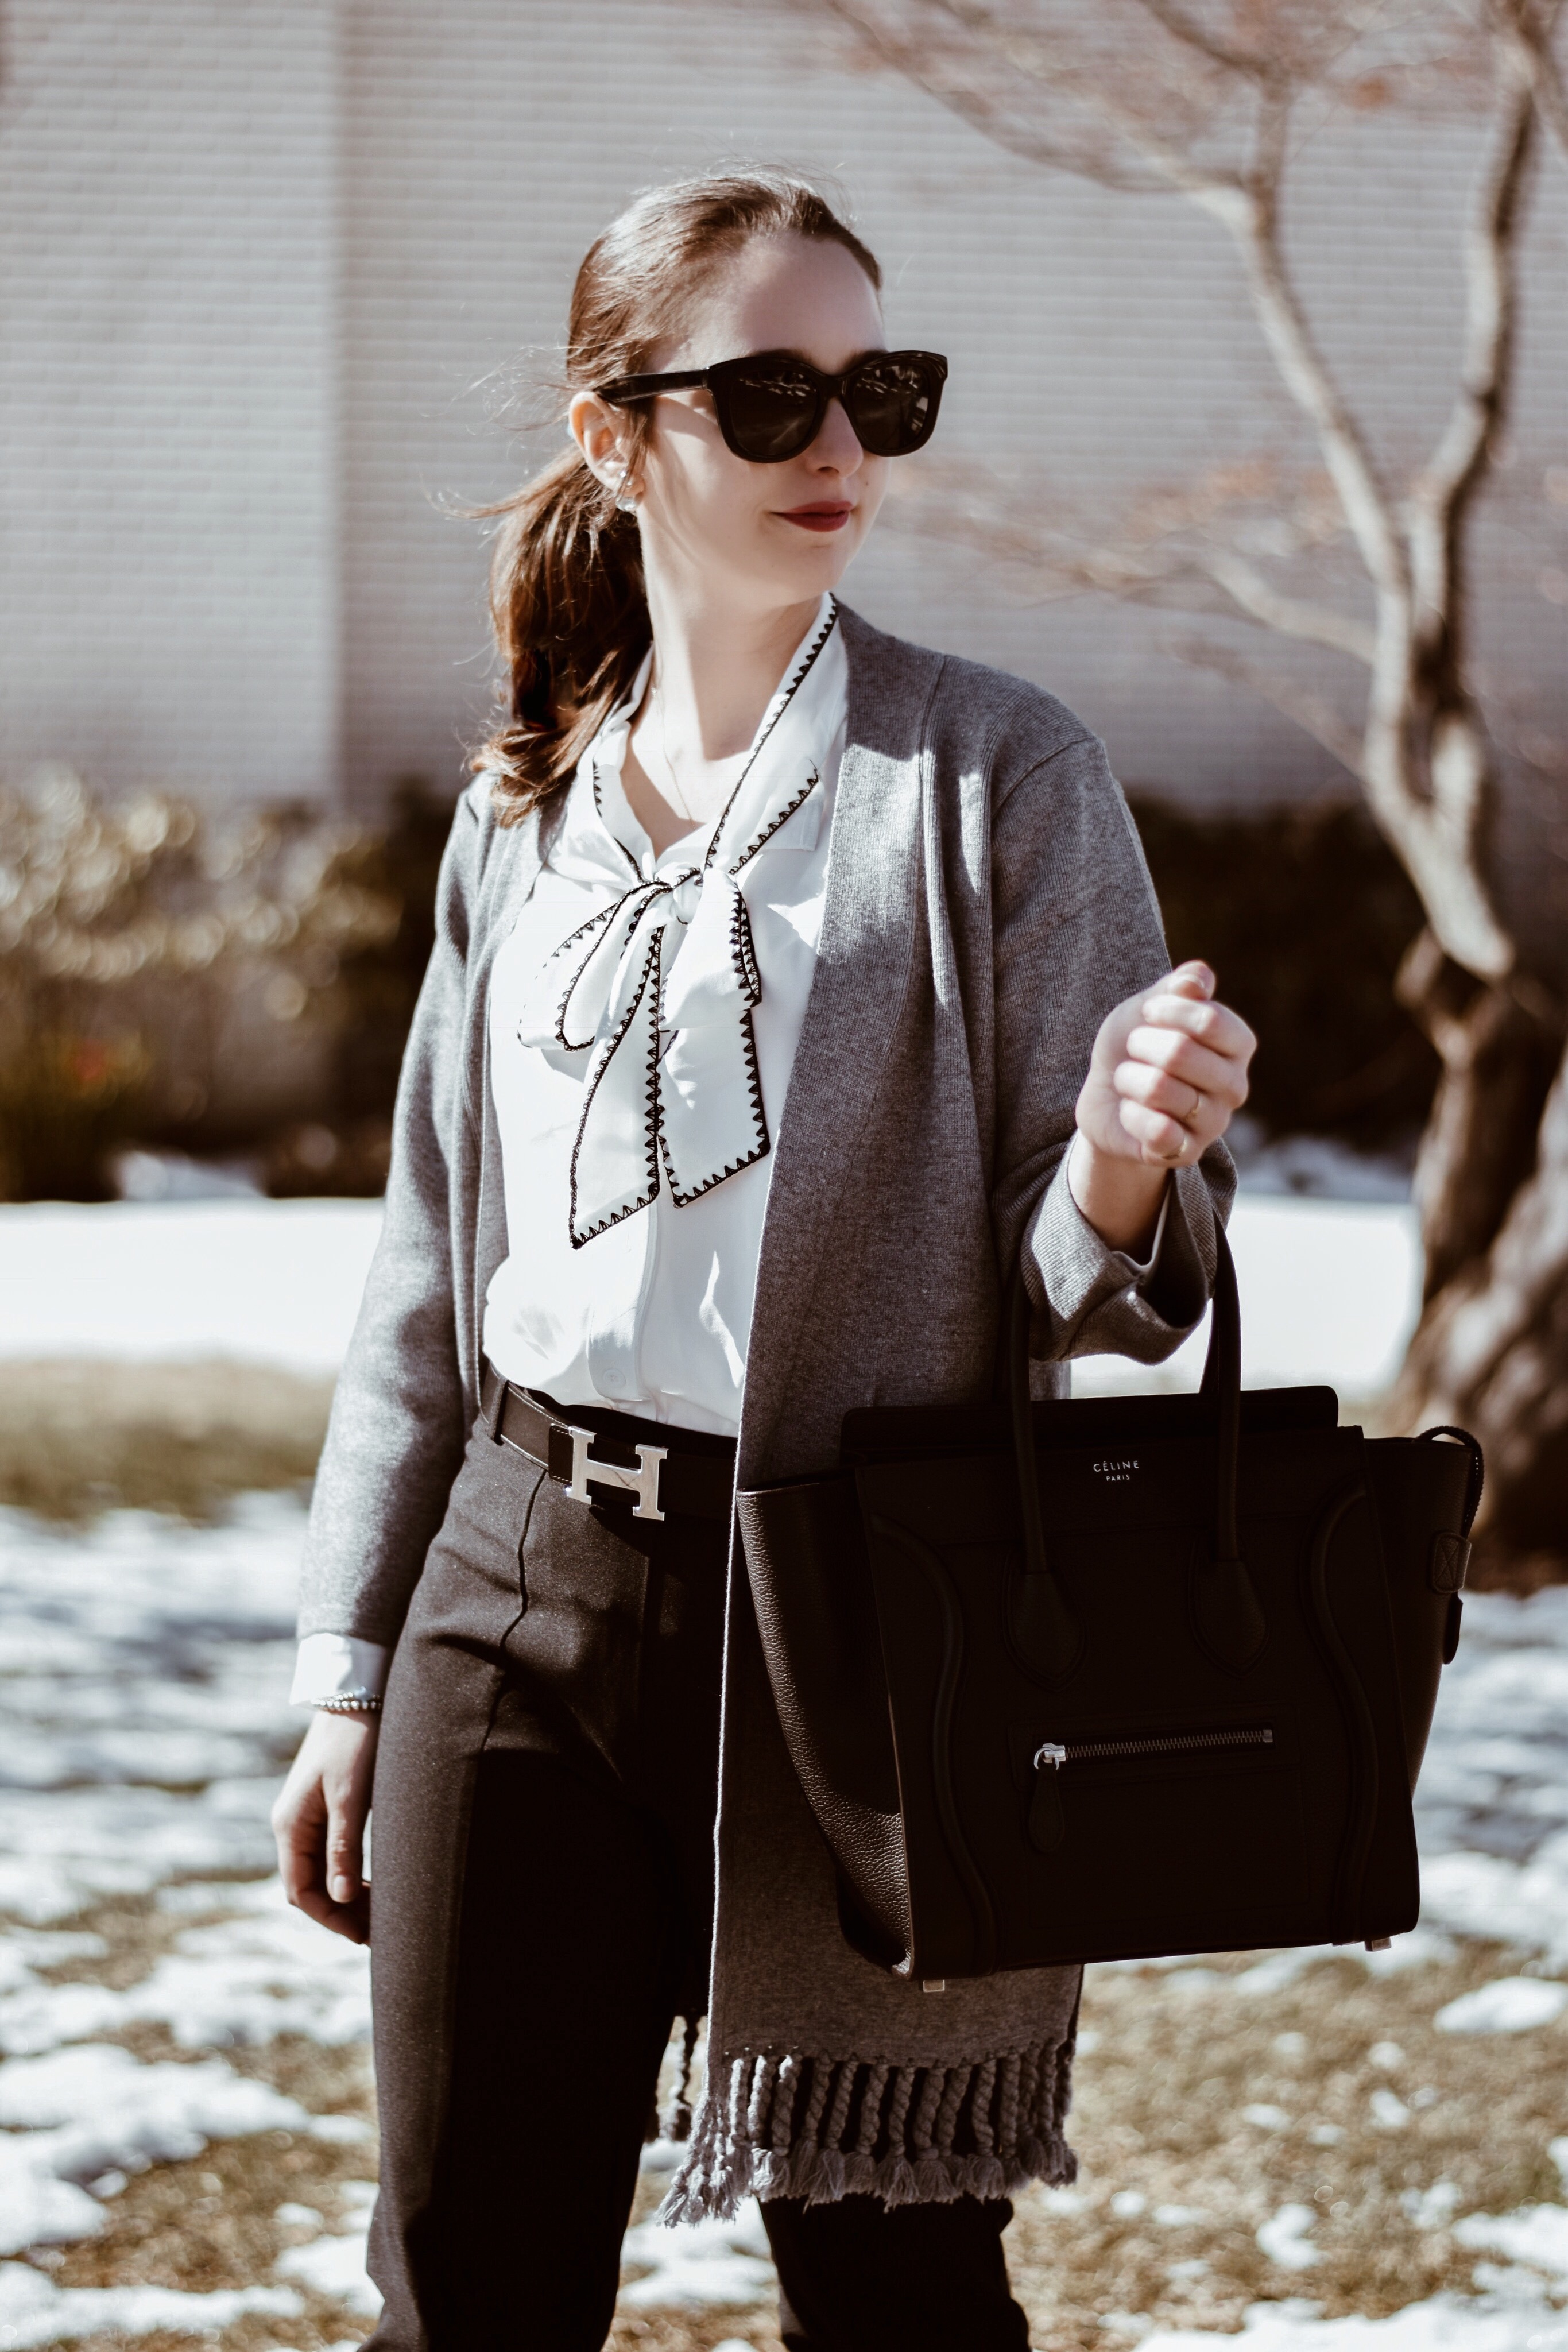 Outfits For The Office That Are Fashion Lover Approved